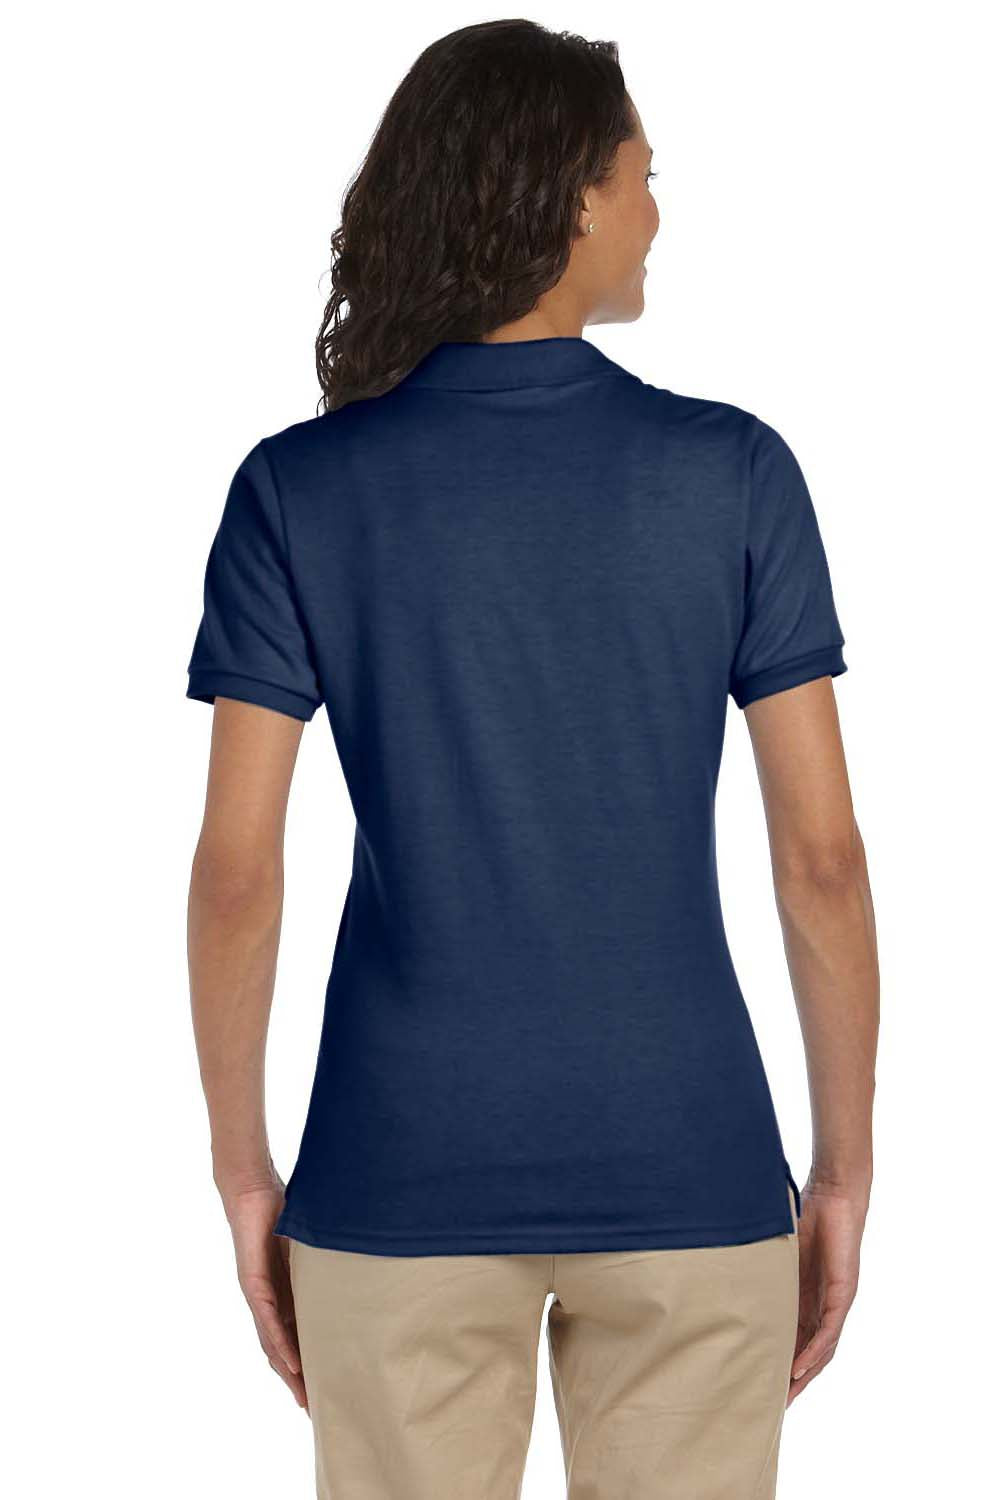 Jerzees 437W Womens SpotShield Stain Resistant Short Sleeve Polo Shirt Navy Blue Back